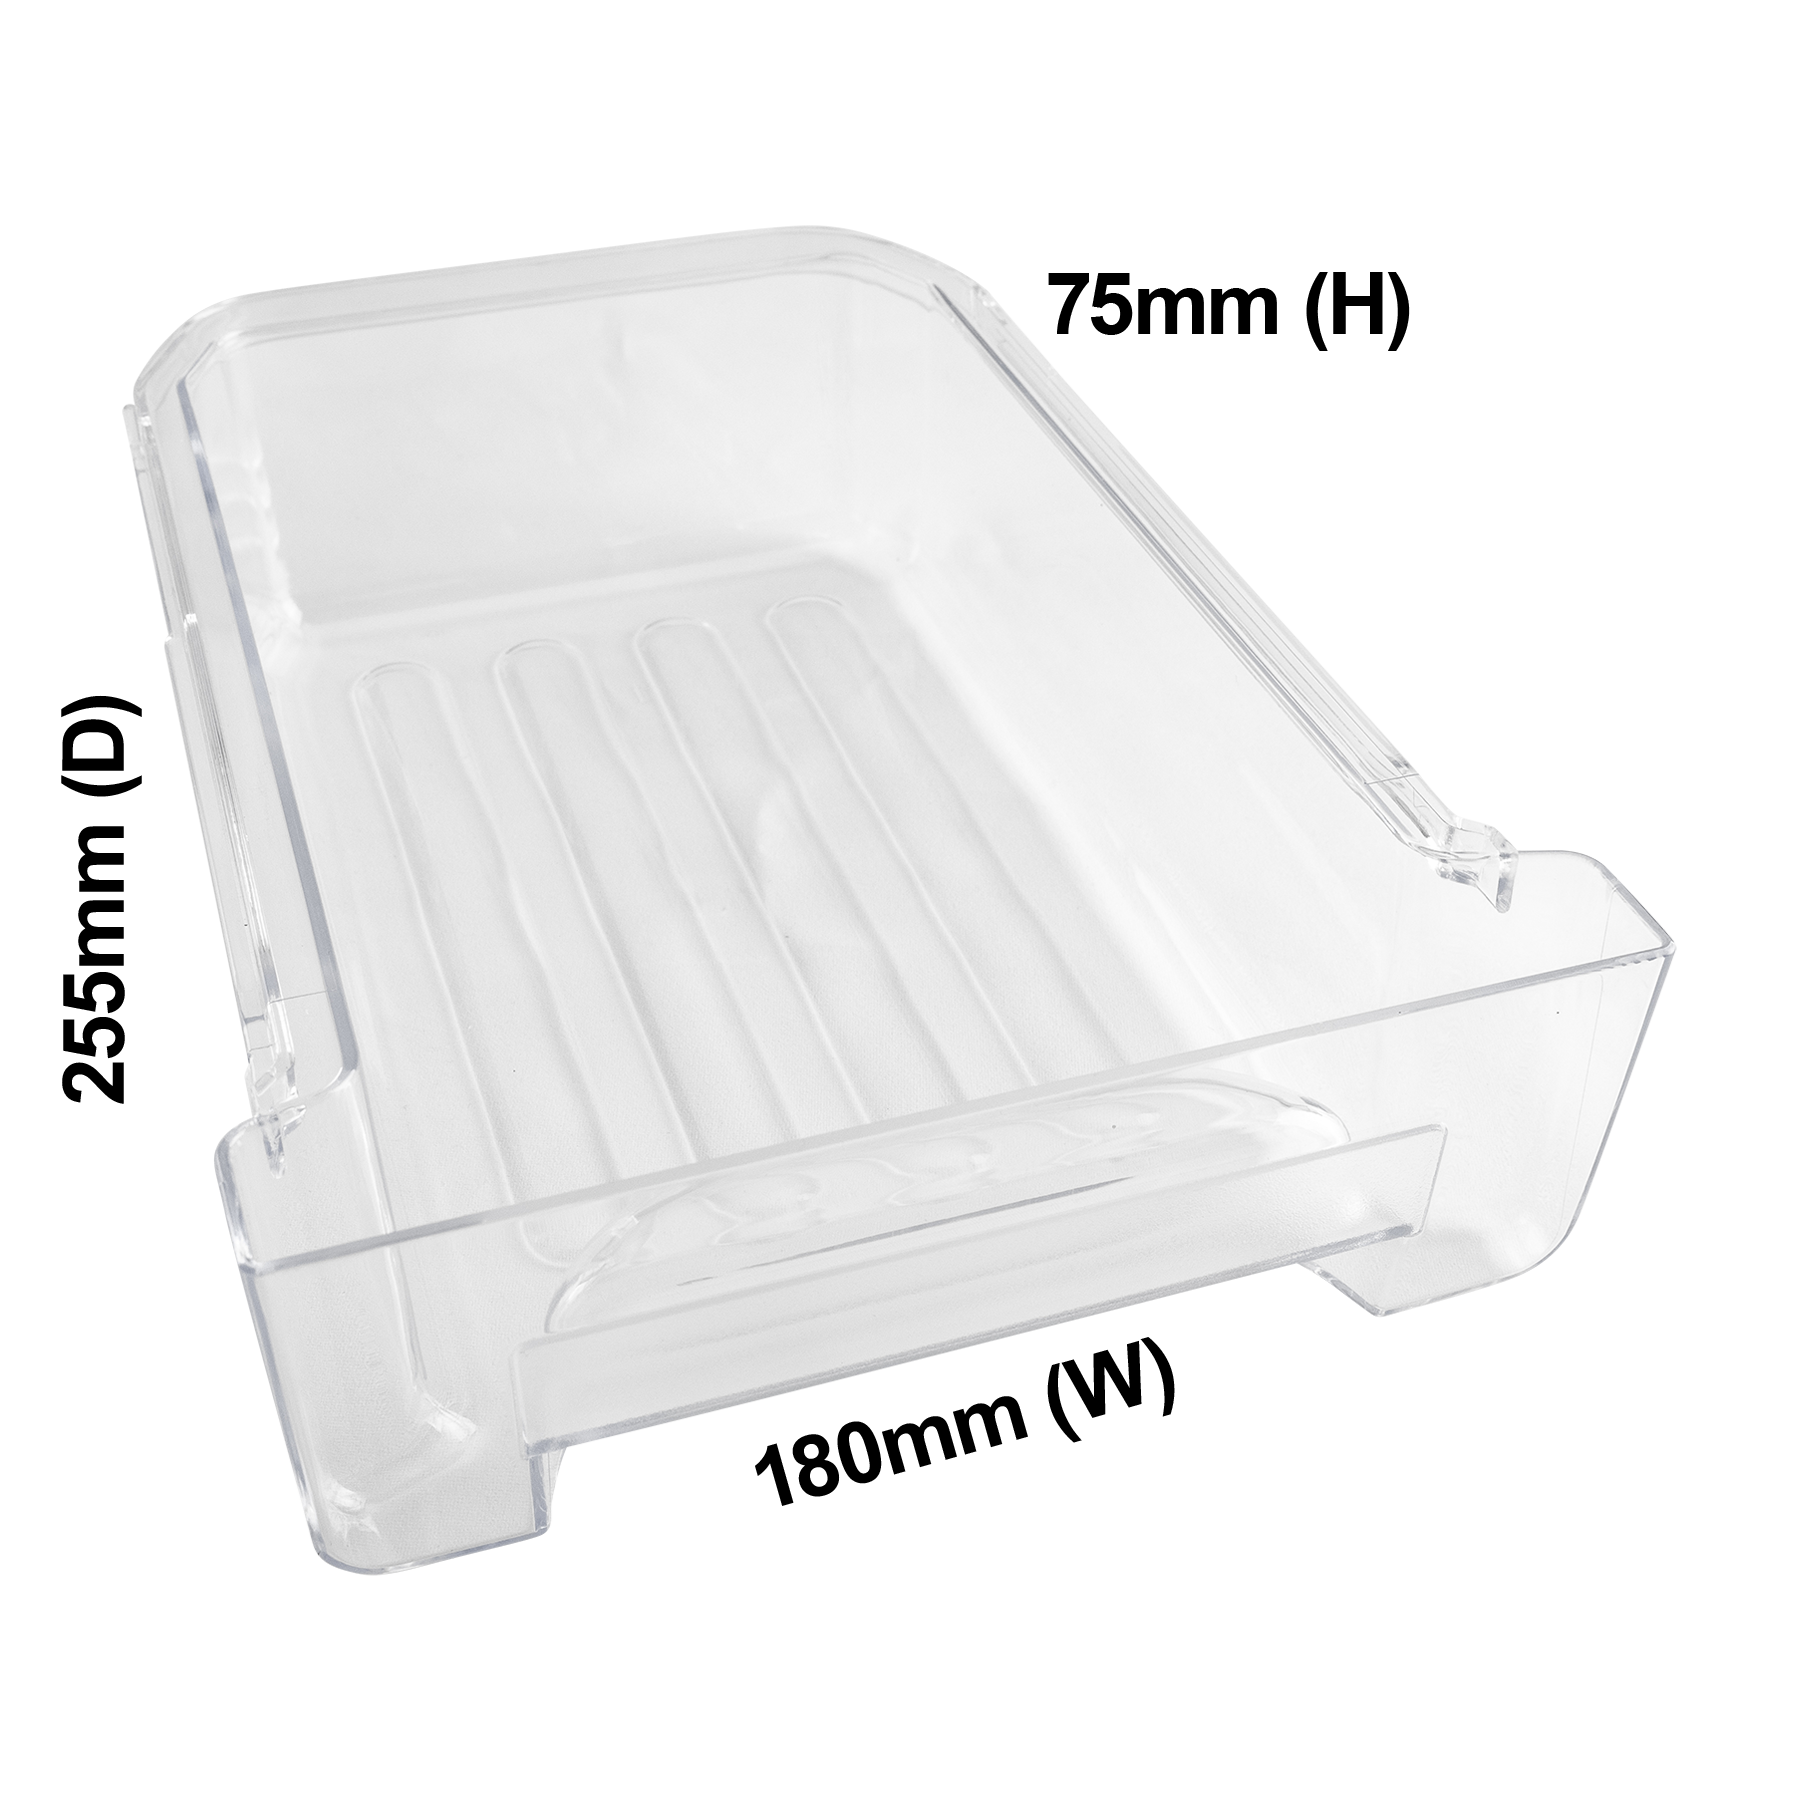 /globalassets/images/accessory-images/sku8588119566012-bin-ice-front.png